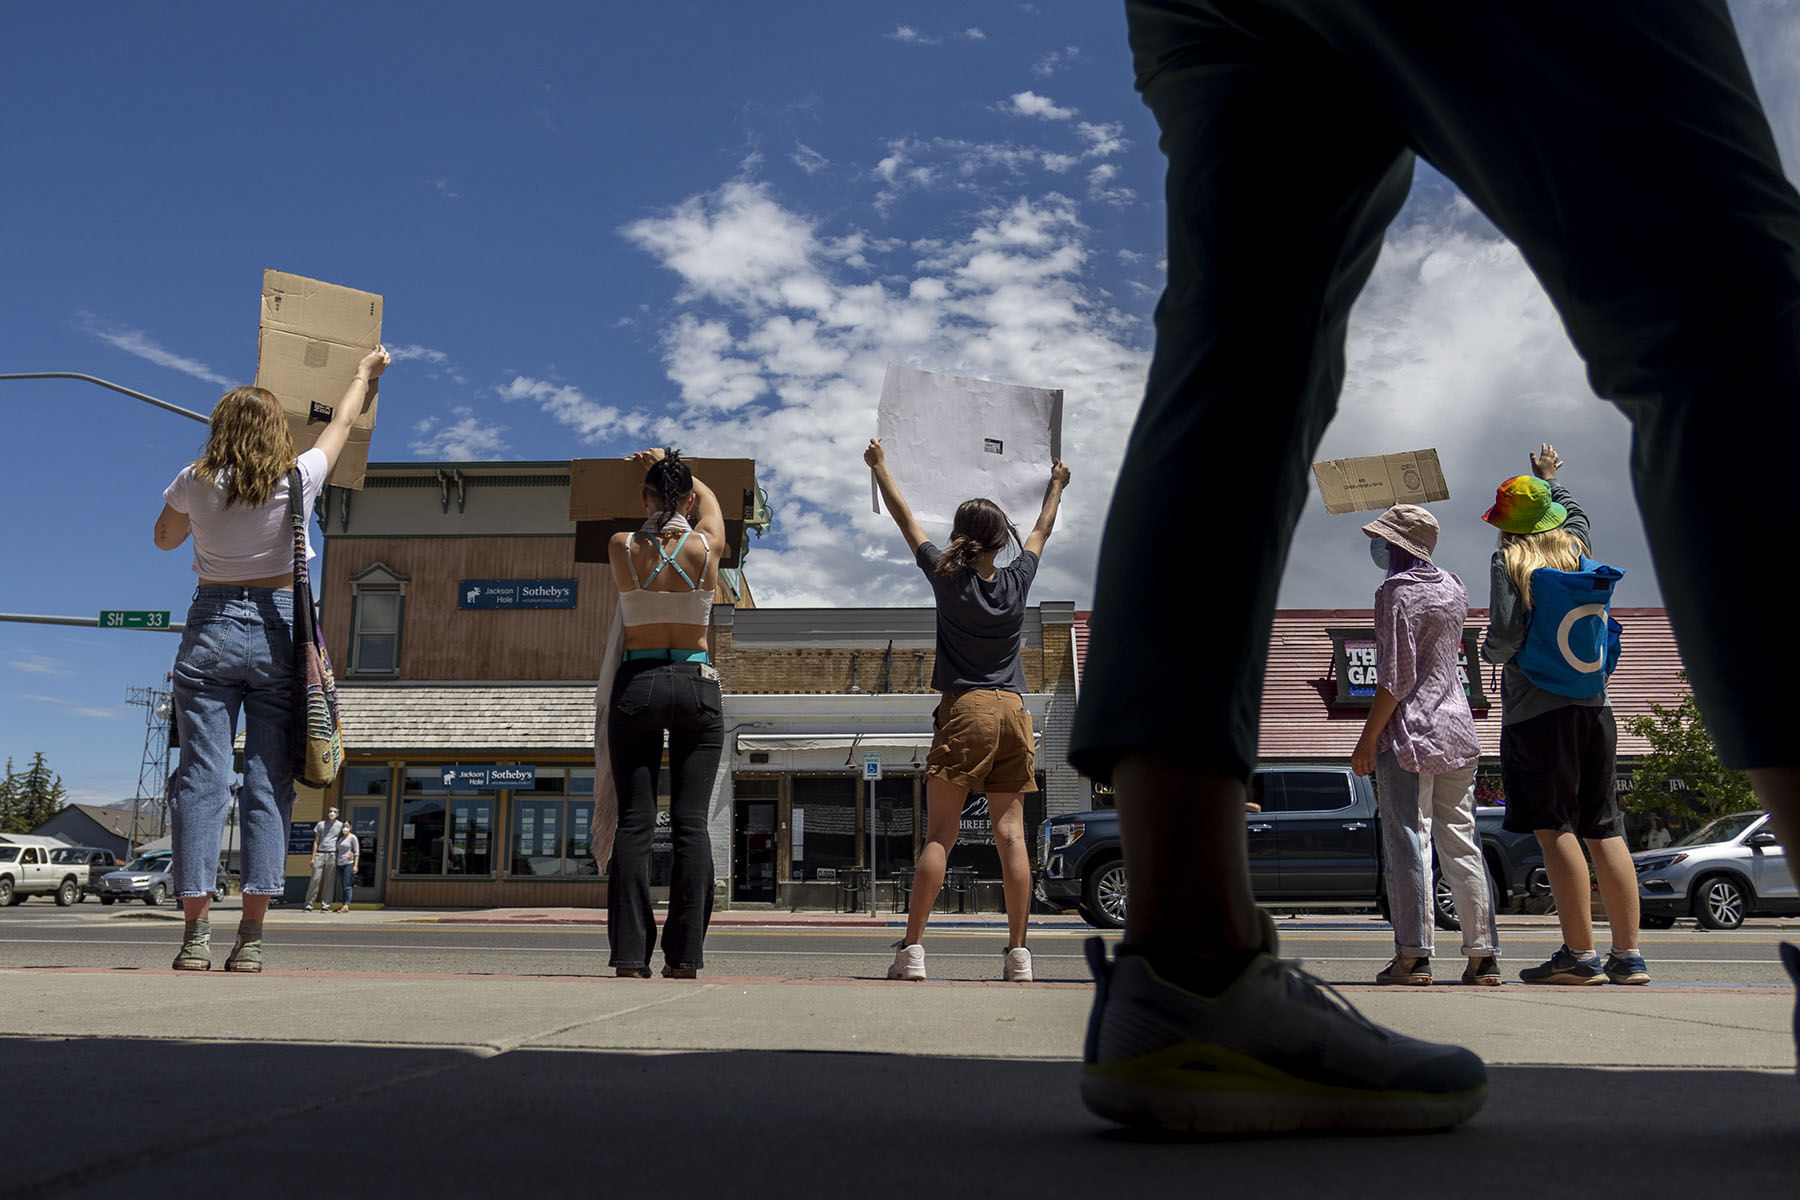 Abortion rights protesters demonstrate in Driggs, Idaho in July 2022.